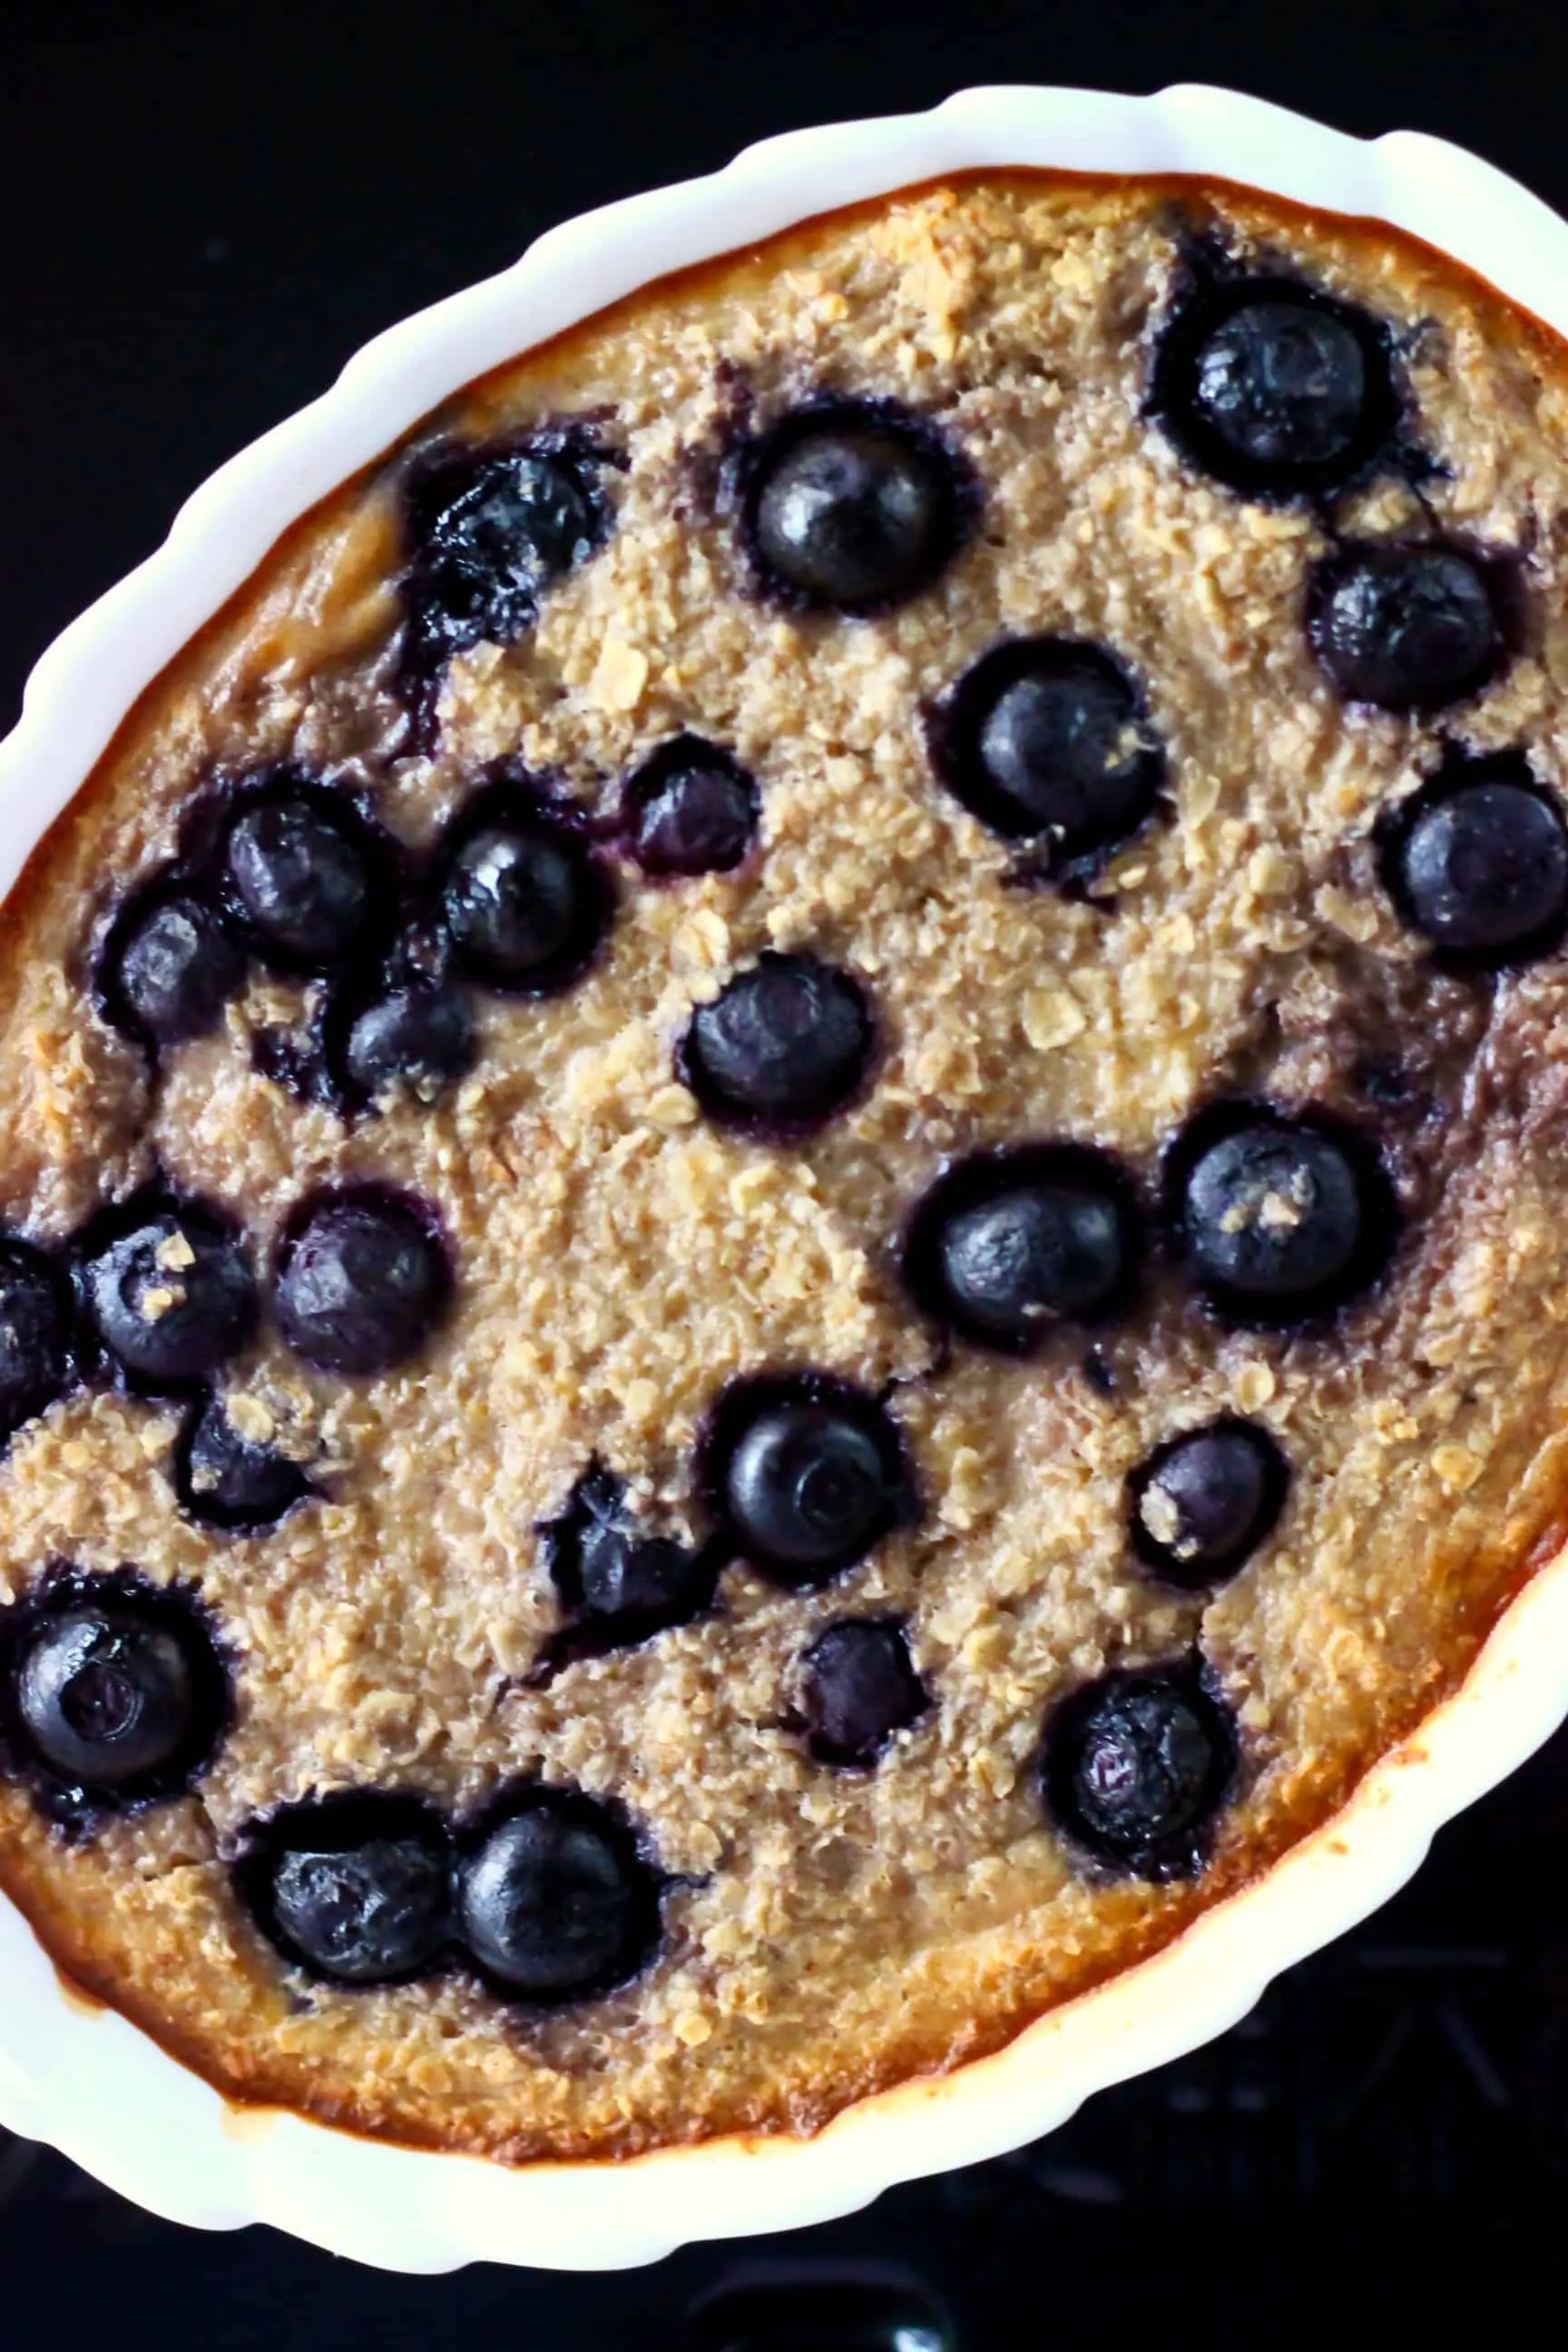 Blueberry banana baked oatmeal in a white oval baking dish against a black background